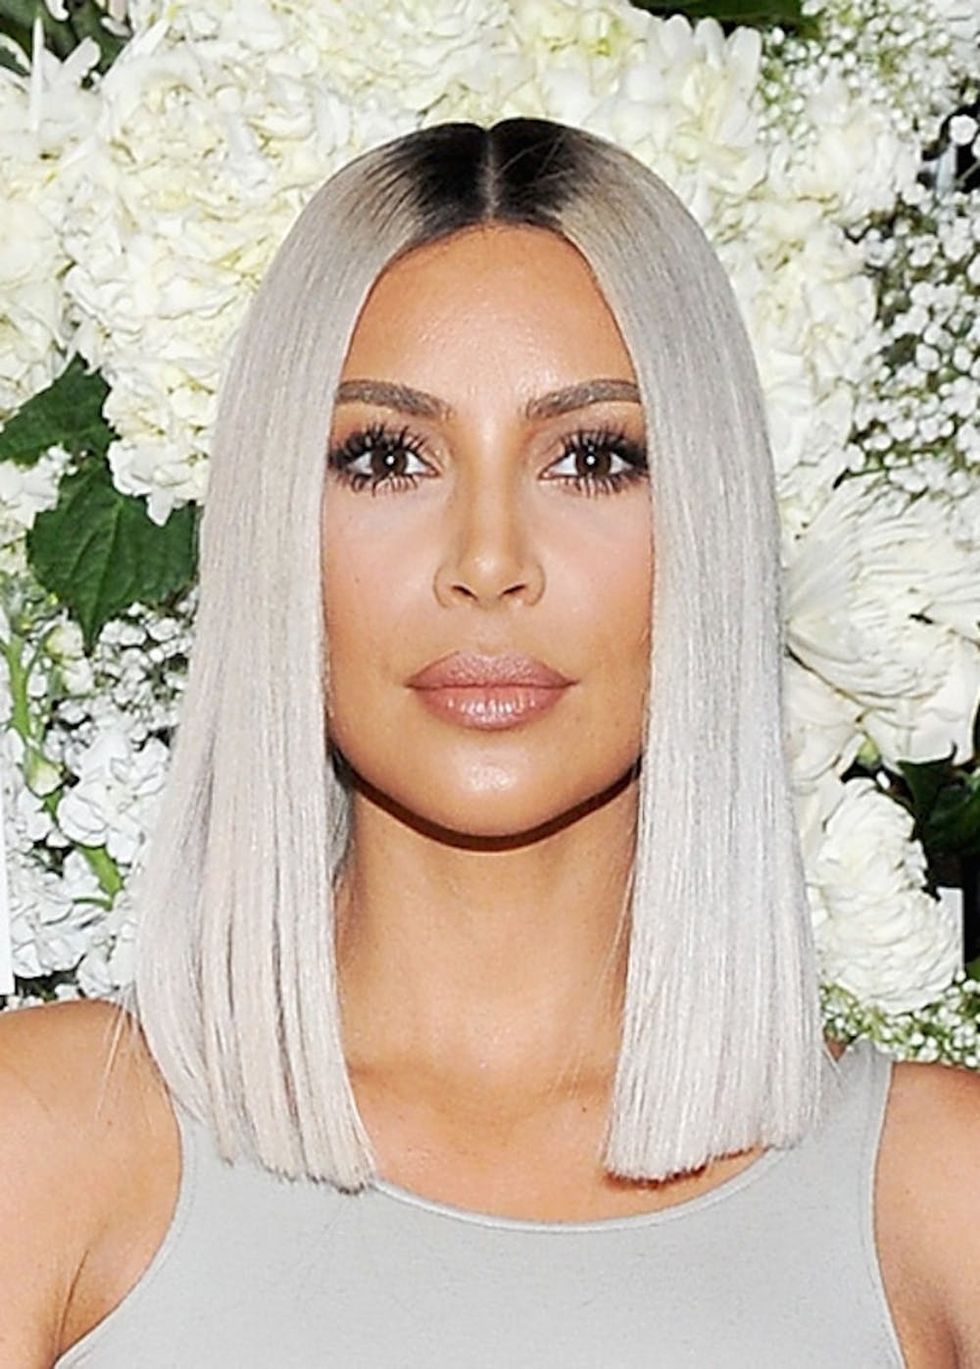 Kim Kardashian West Is Channeling Kylie Jenner With A Short Blonde